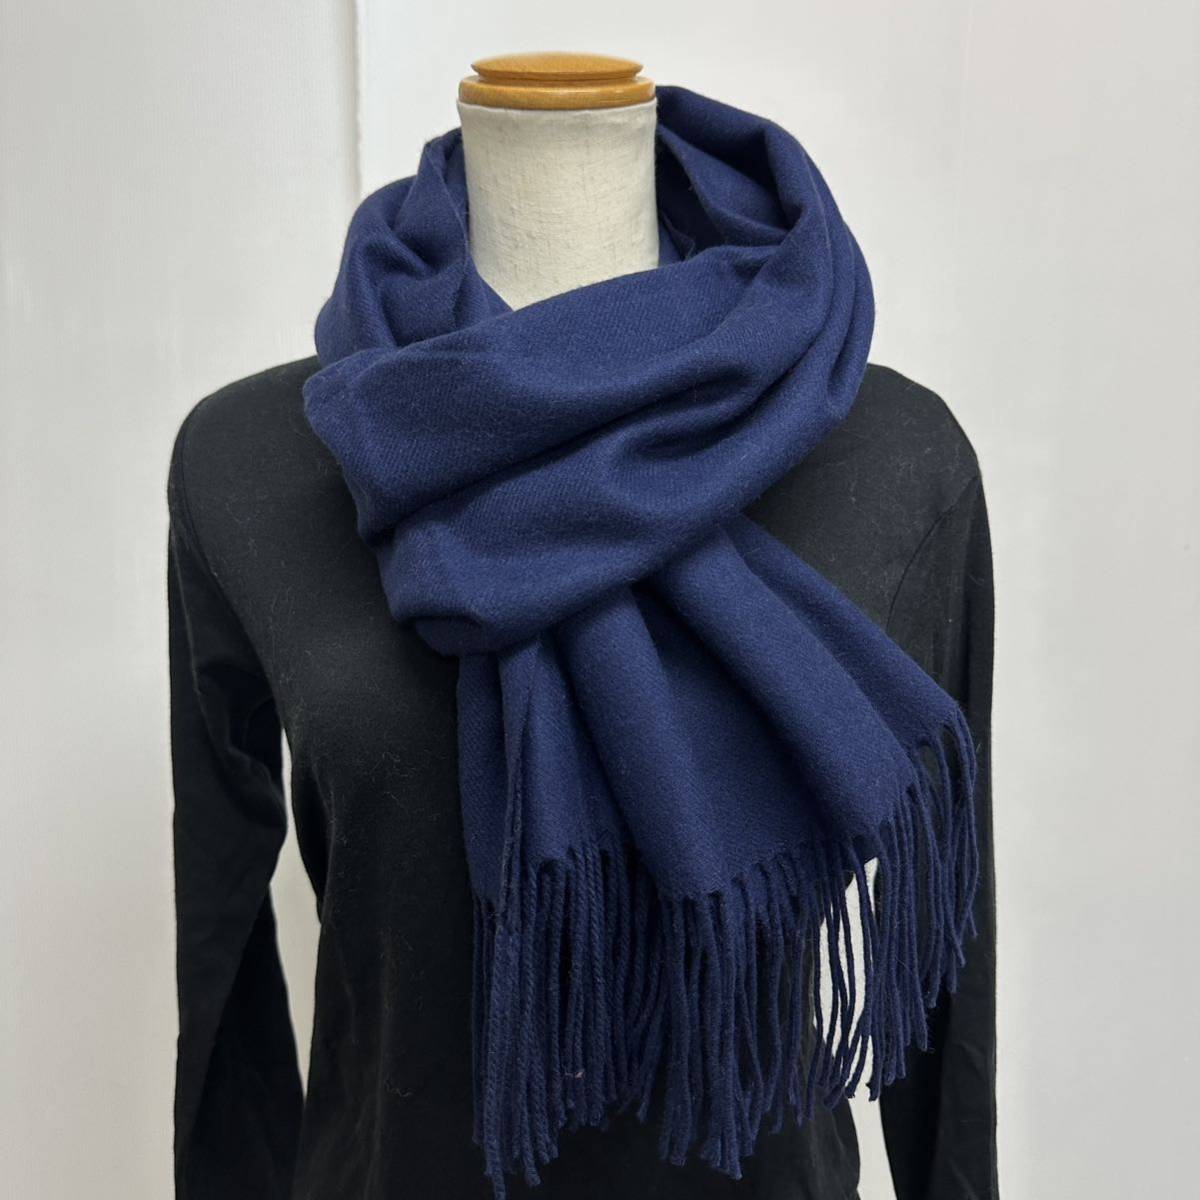  new goods 52351③ LANVIN COLLECTION Lanvin collection cashmere . stole / navy navy blue muffler protection against cold rug hand uoshu Aurora 